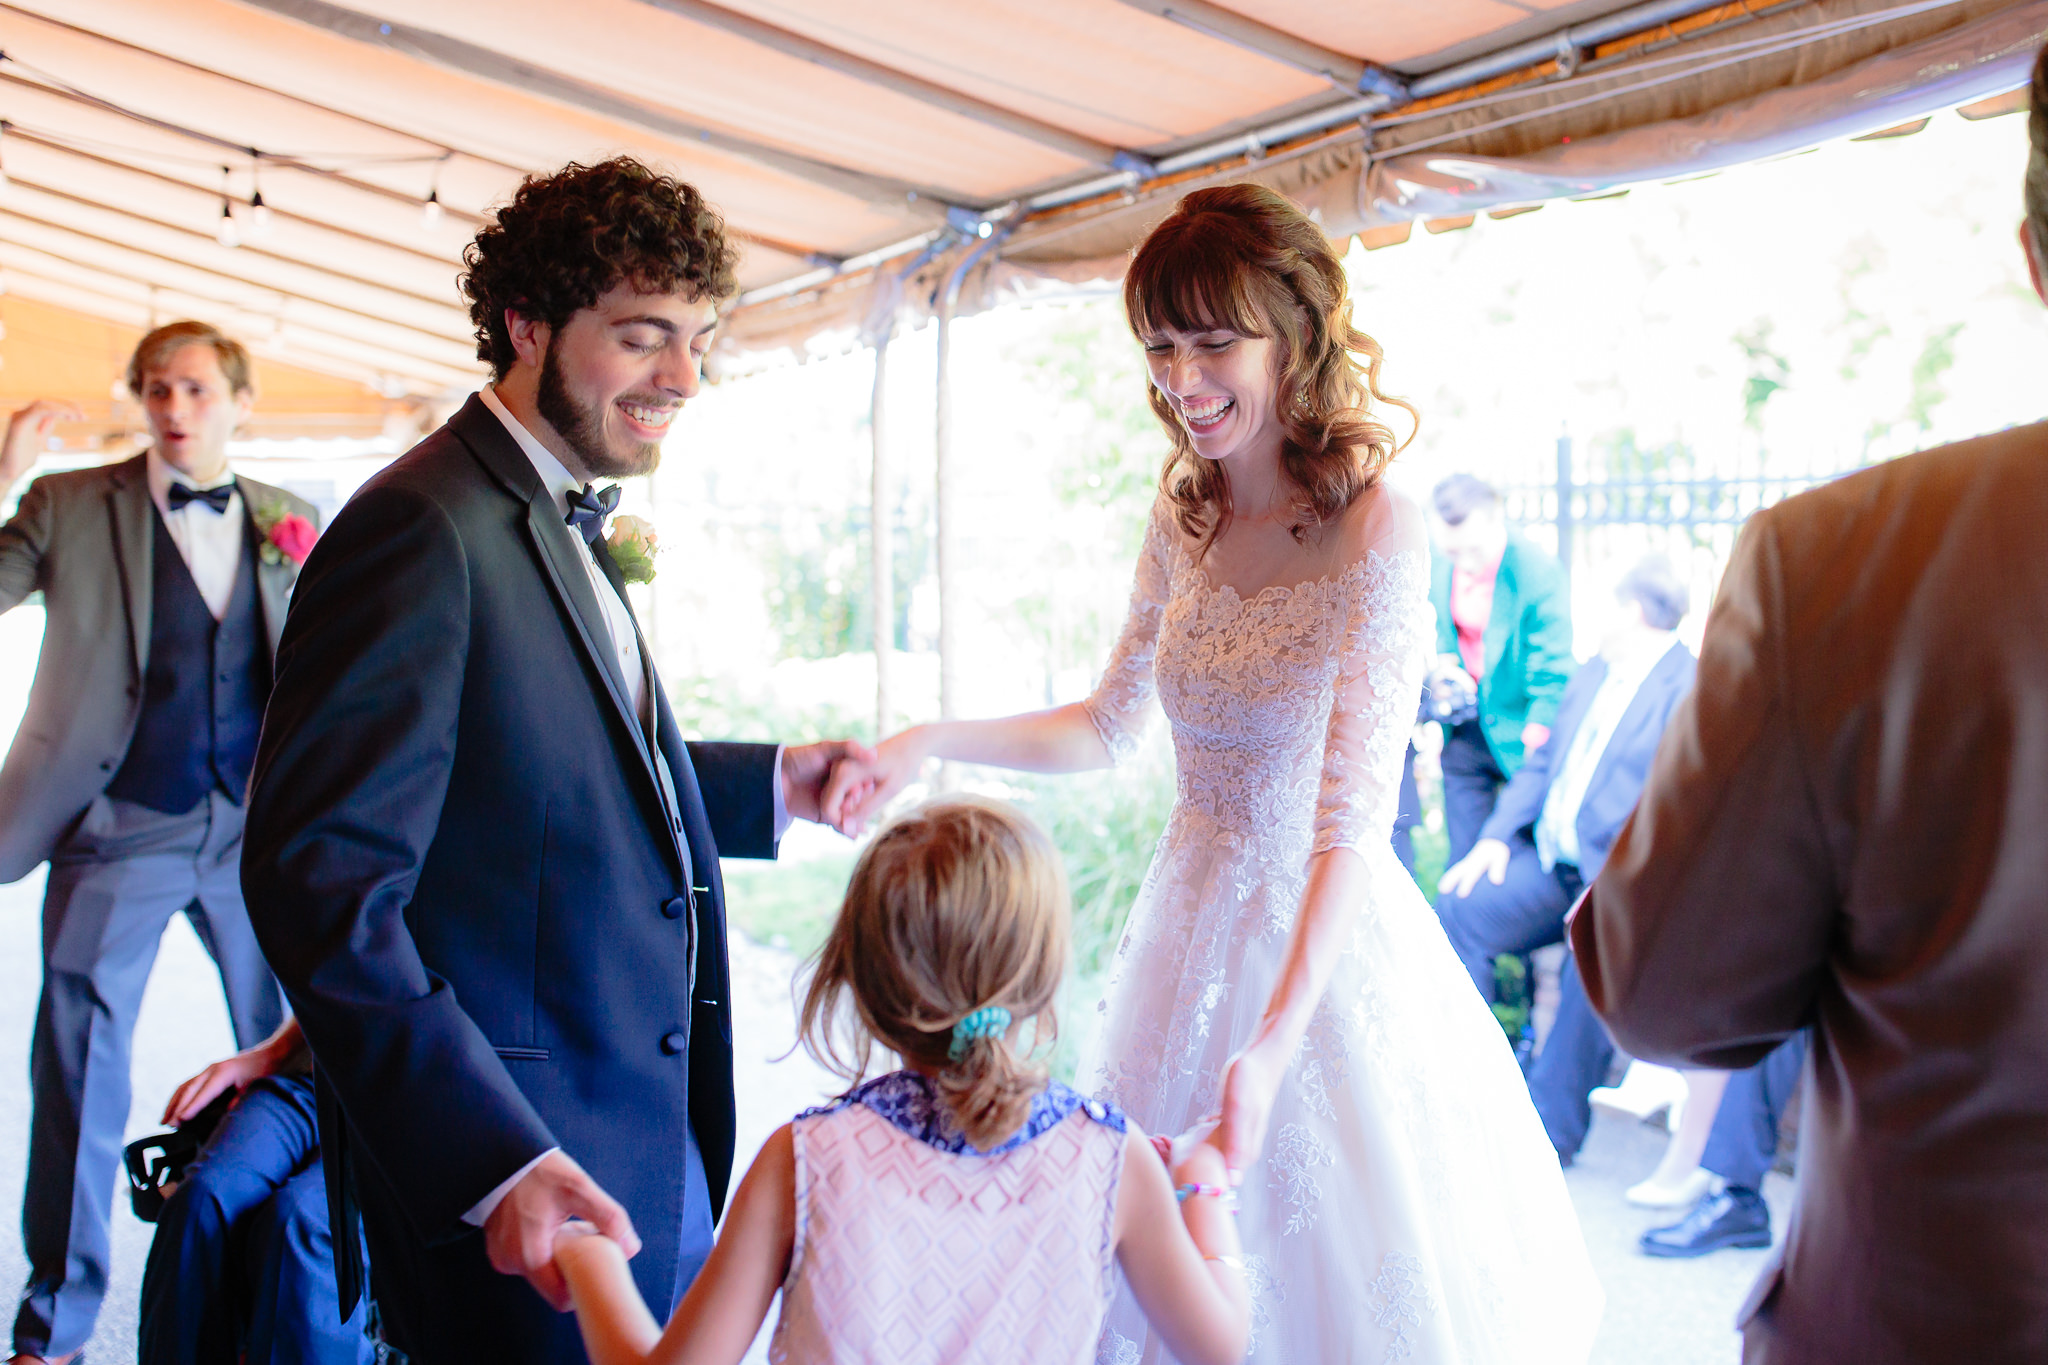 Bride & groom dance with a young guest at their Beaver Station wedding